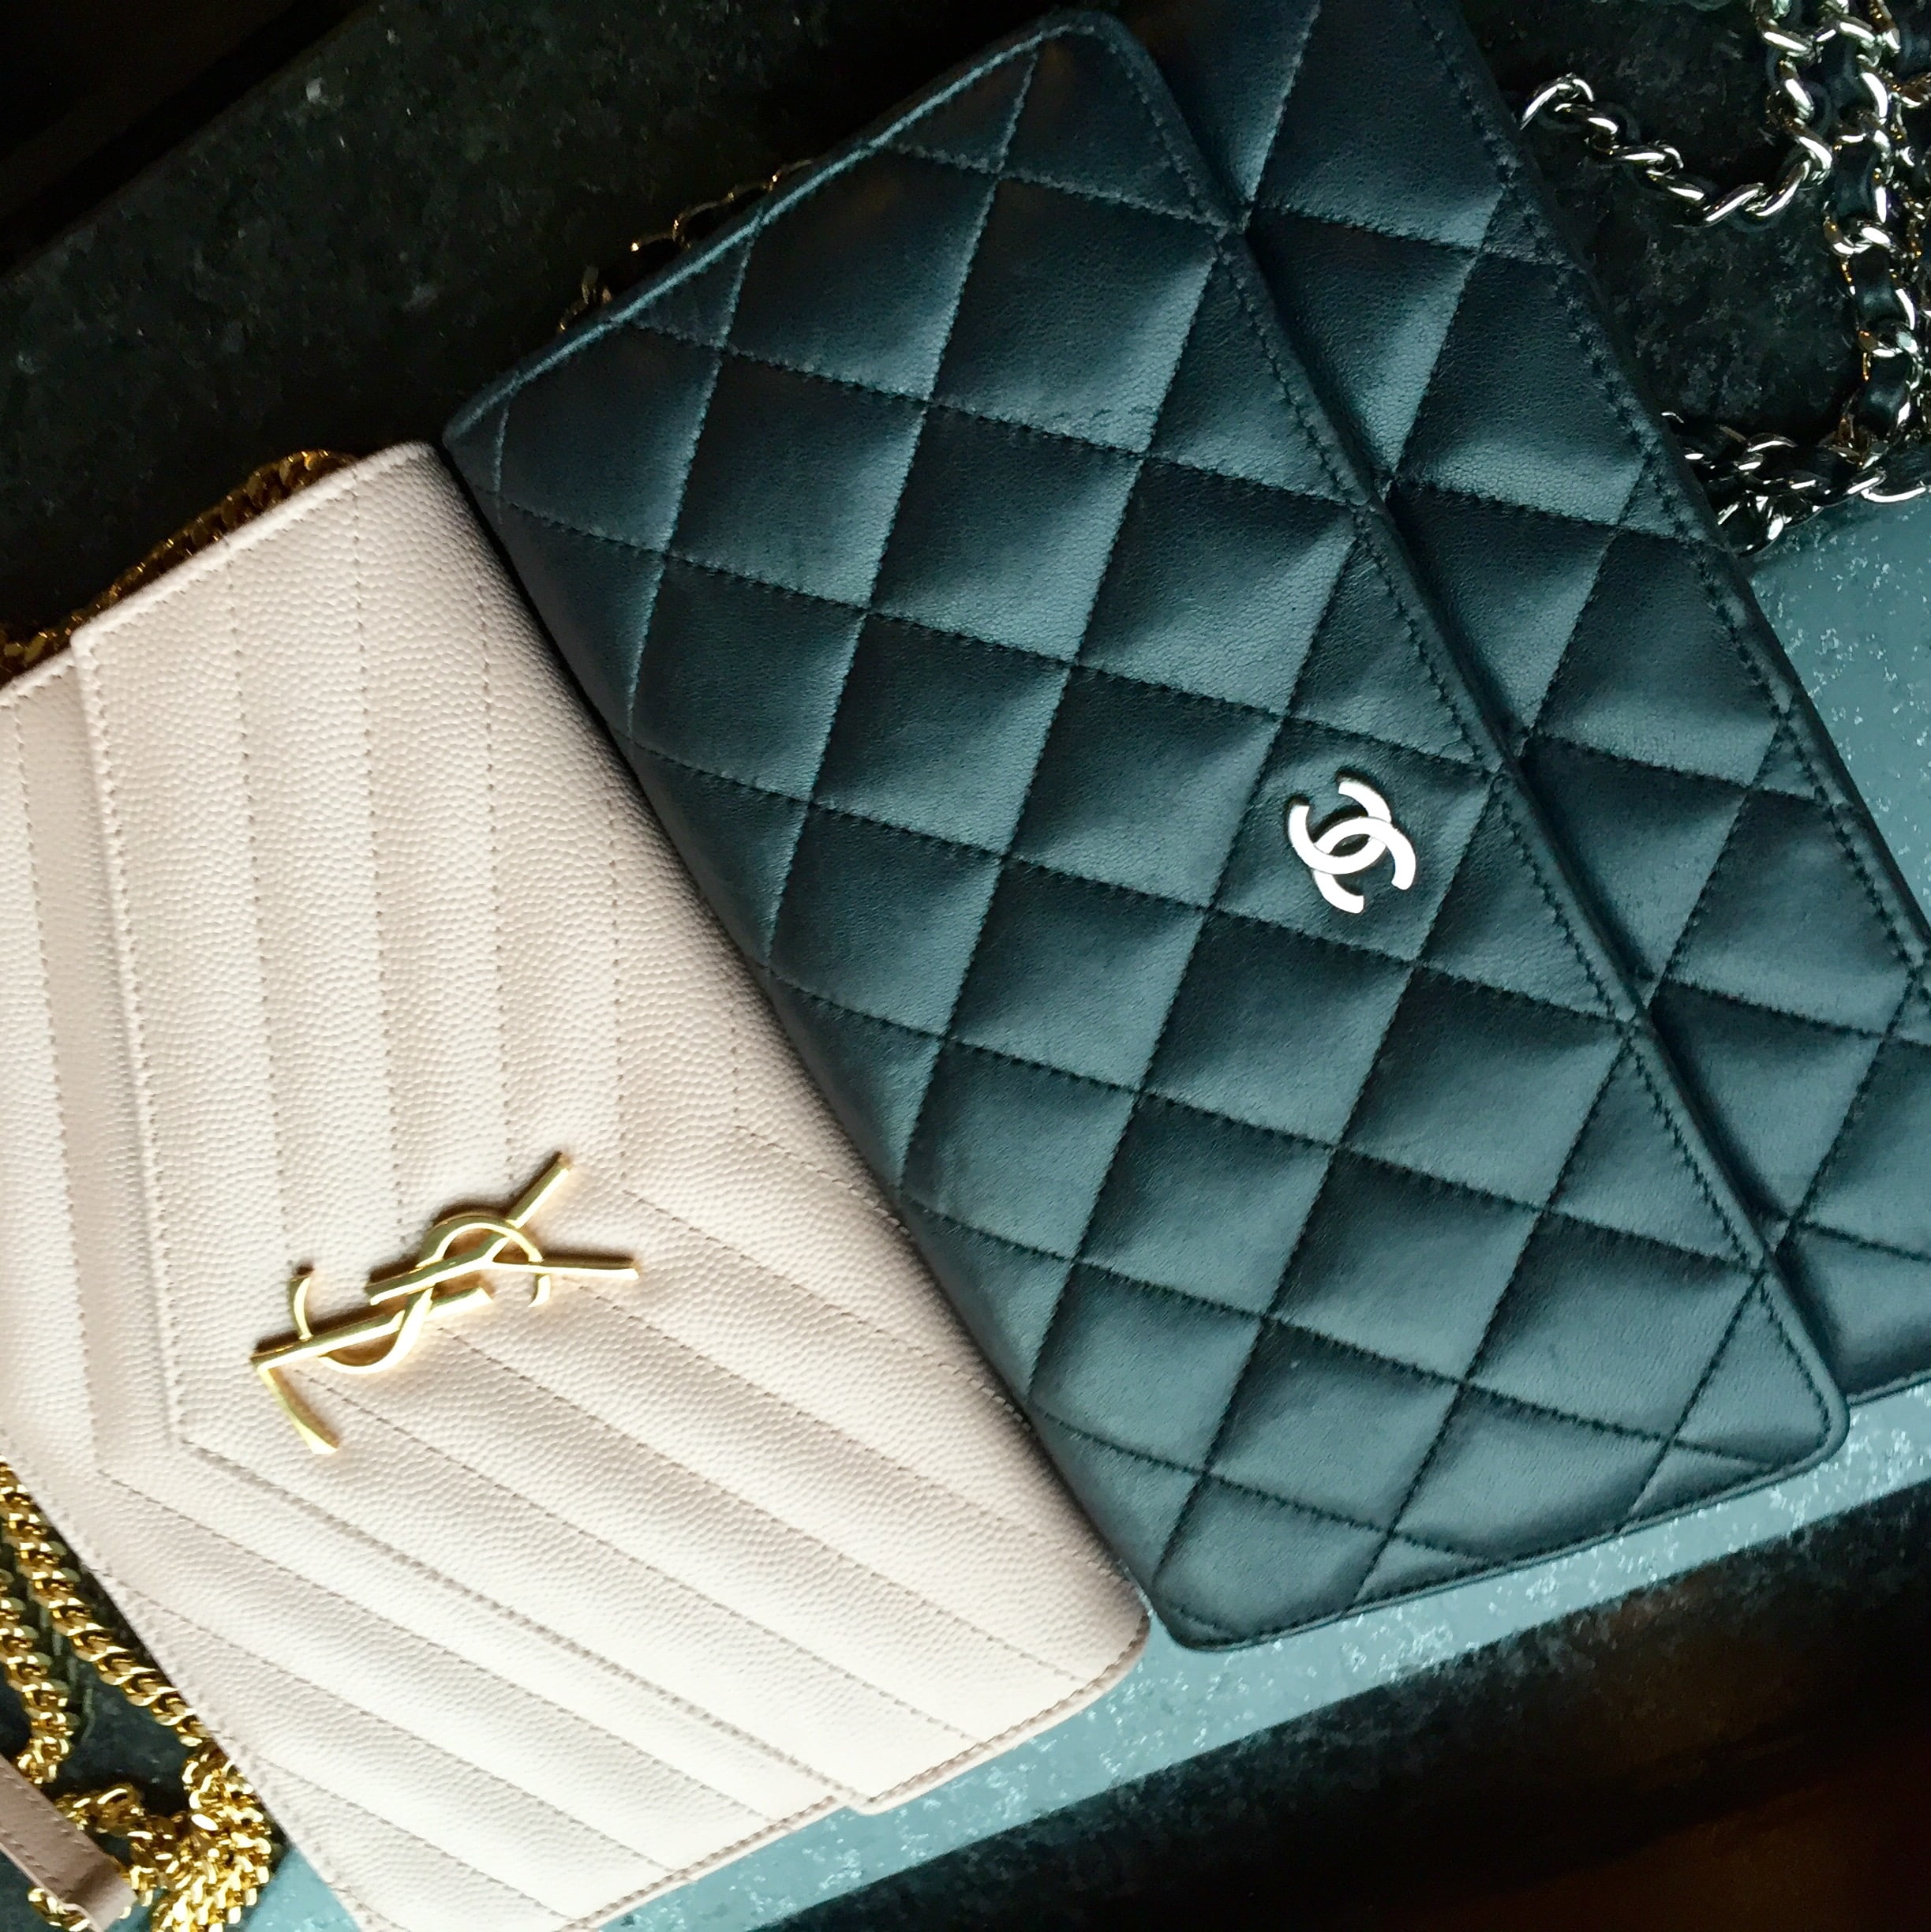 The YSL Wallet on Chain is a very popular classic bag, but you can ach